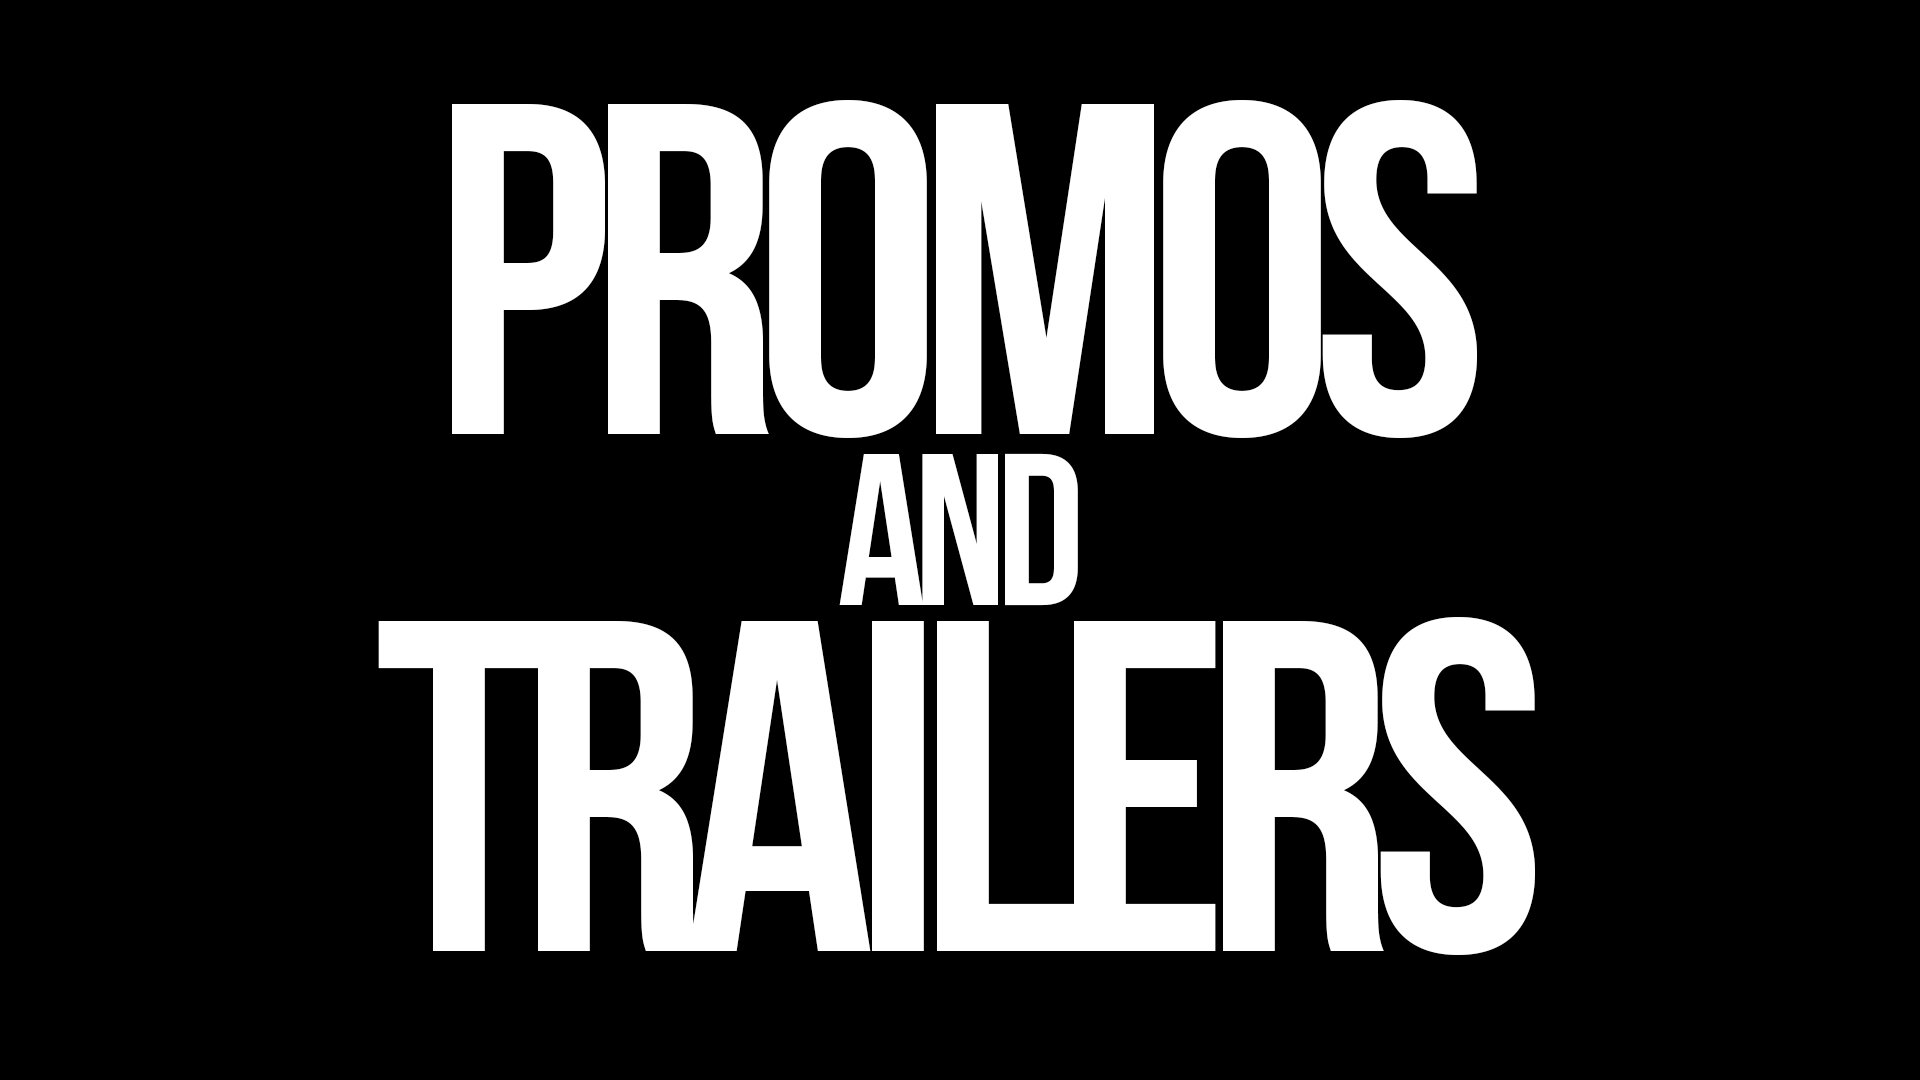 Promos and Trailers (Streaming)